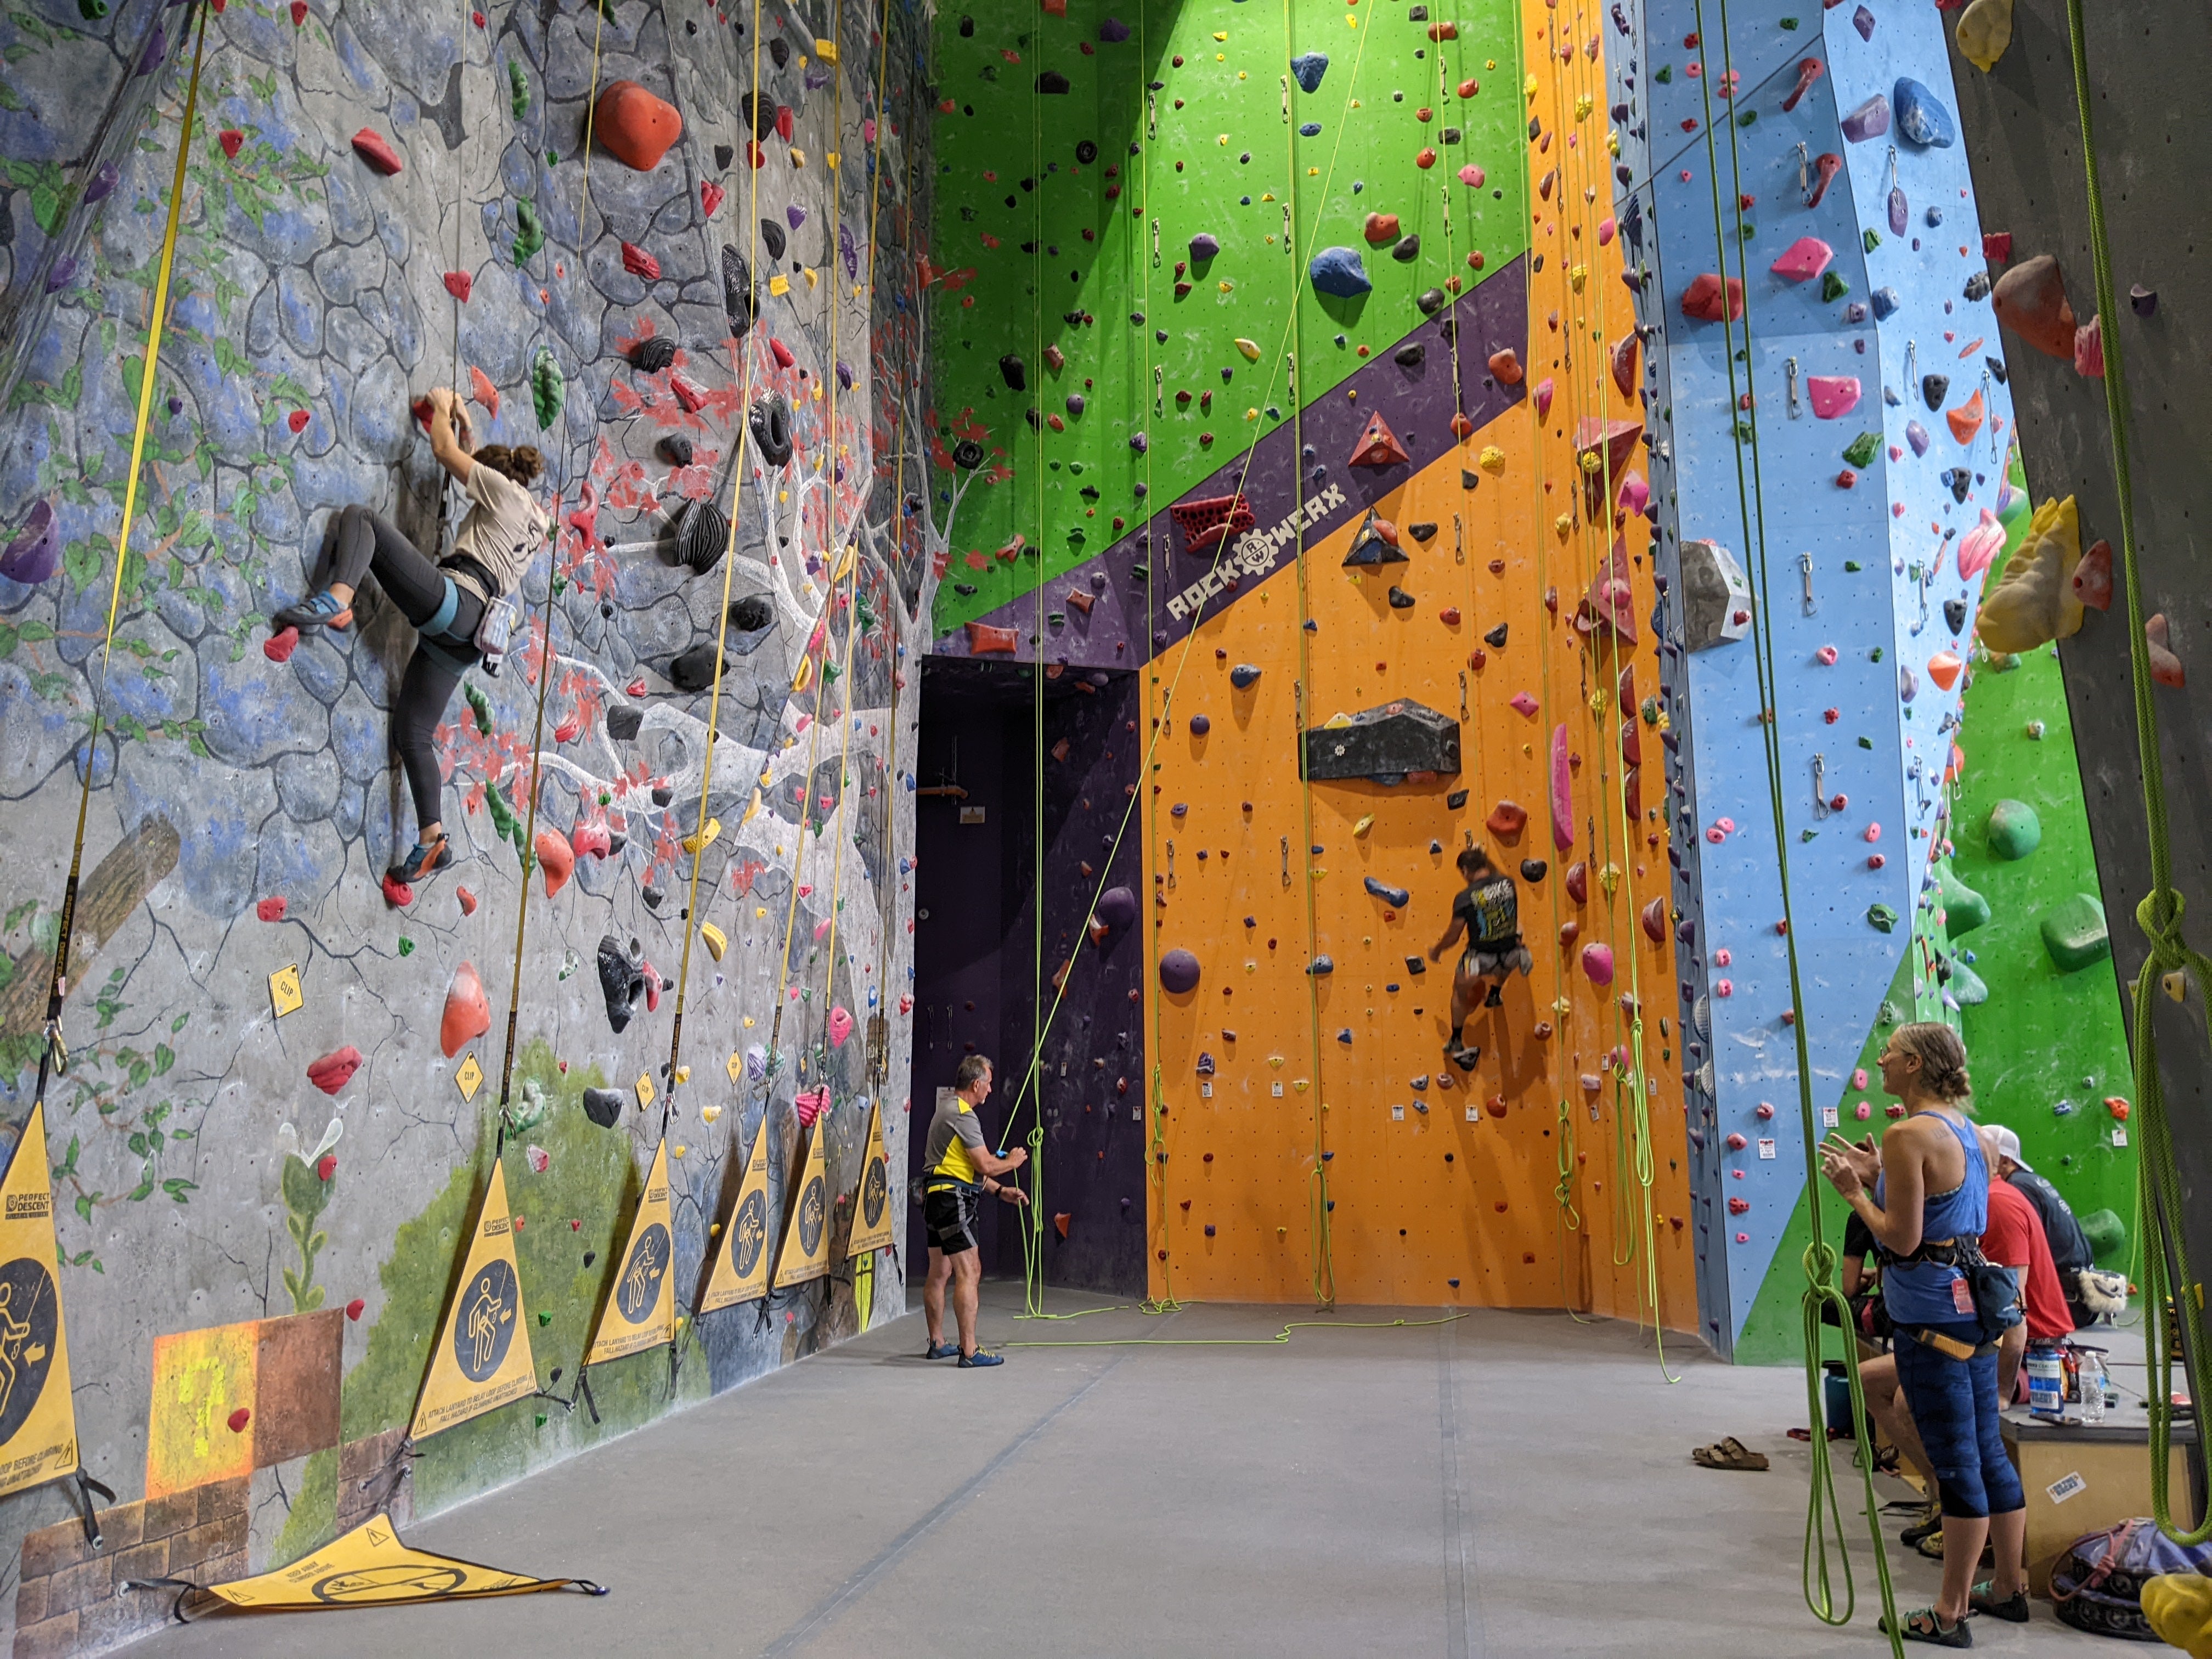 Climbing Pro Shop - Buy Courses, Gift Cards and More!